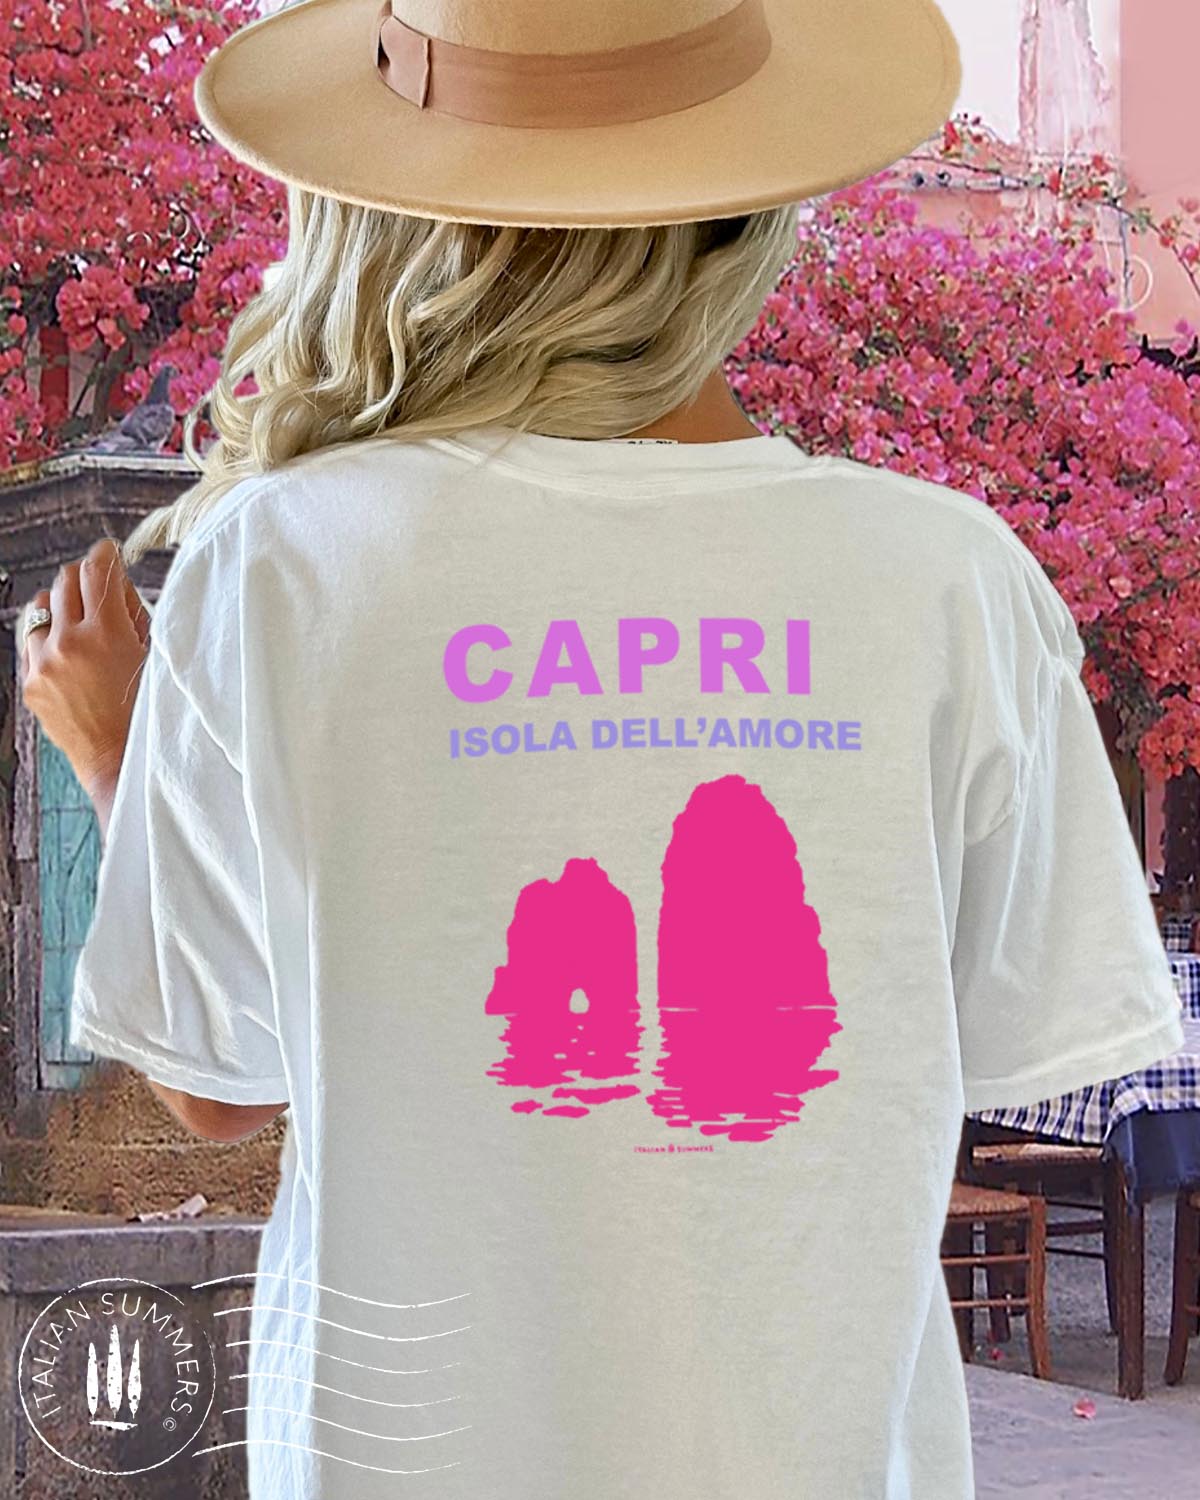 A youg woman stands in front of a quaint Italian island restaurant covered in pink bougainvilleas.  She is standing with her back to us  wearing a soft white cotton shirt with a pink and fuchsia print depicting the Faraglioni islets  of the famous island of Capri.  The text on the print states " Capri Isola dell'Amore" Capri, island of love.